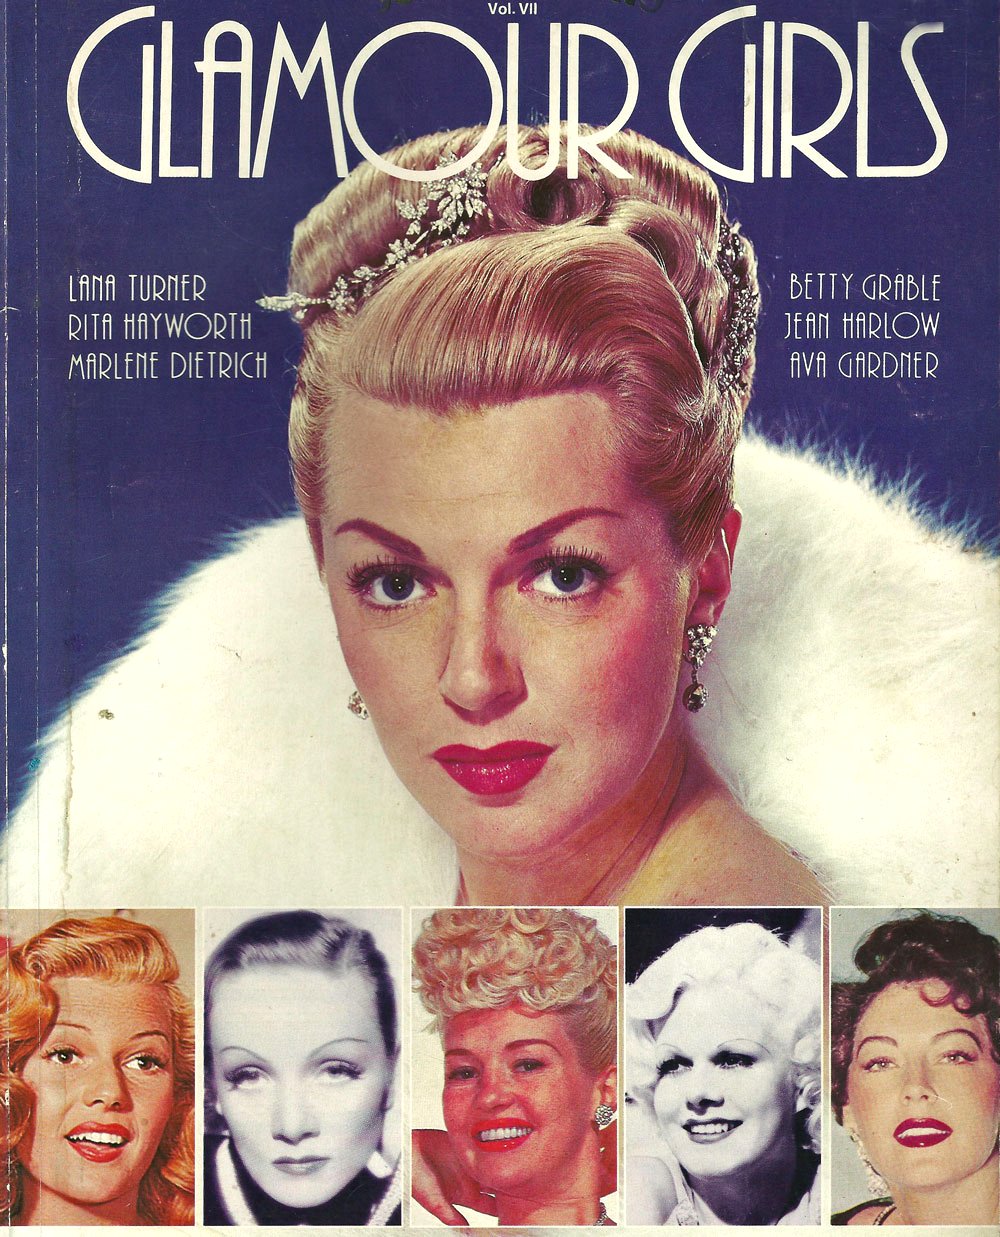 Glamour Girls 1940s Google image from http://hair-and-makeup-artist.com/wordpress/wp-content/uploads/2012/01/Mag-cover-1940s.jpg